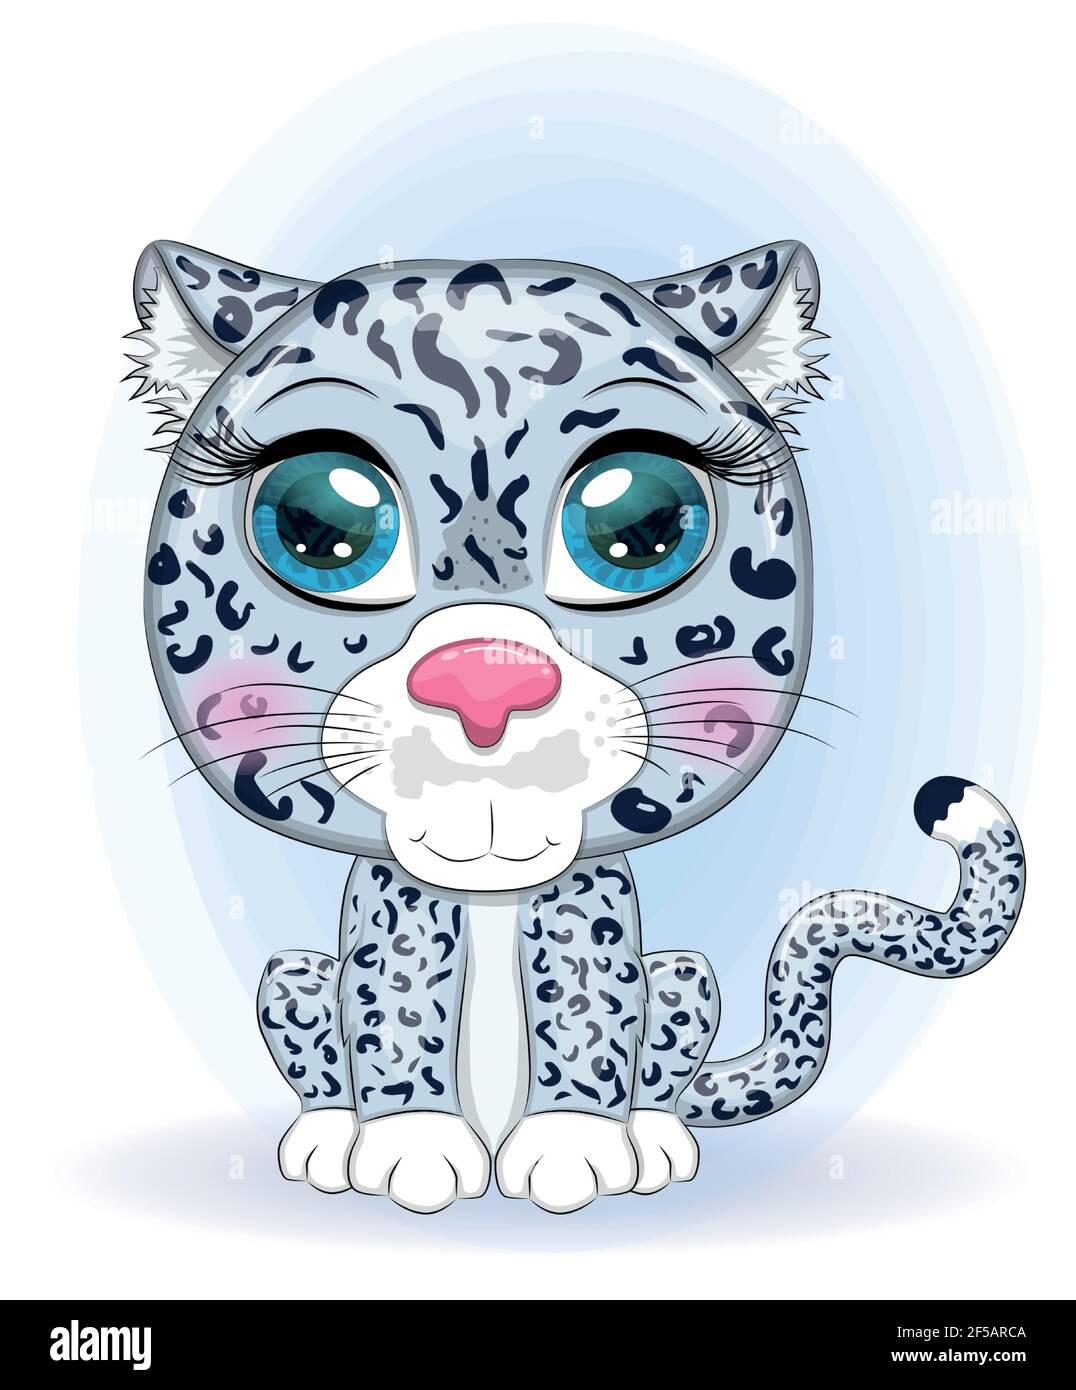 Cartoon snow leopard with expressive eyes. Wild animals, character, childish cute style Stock Vector